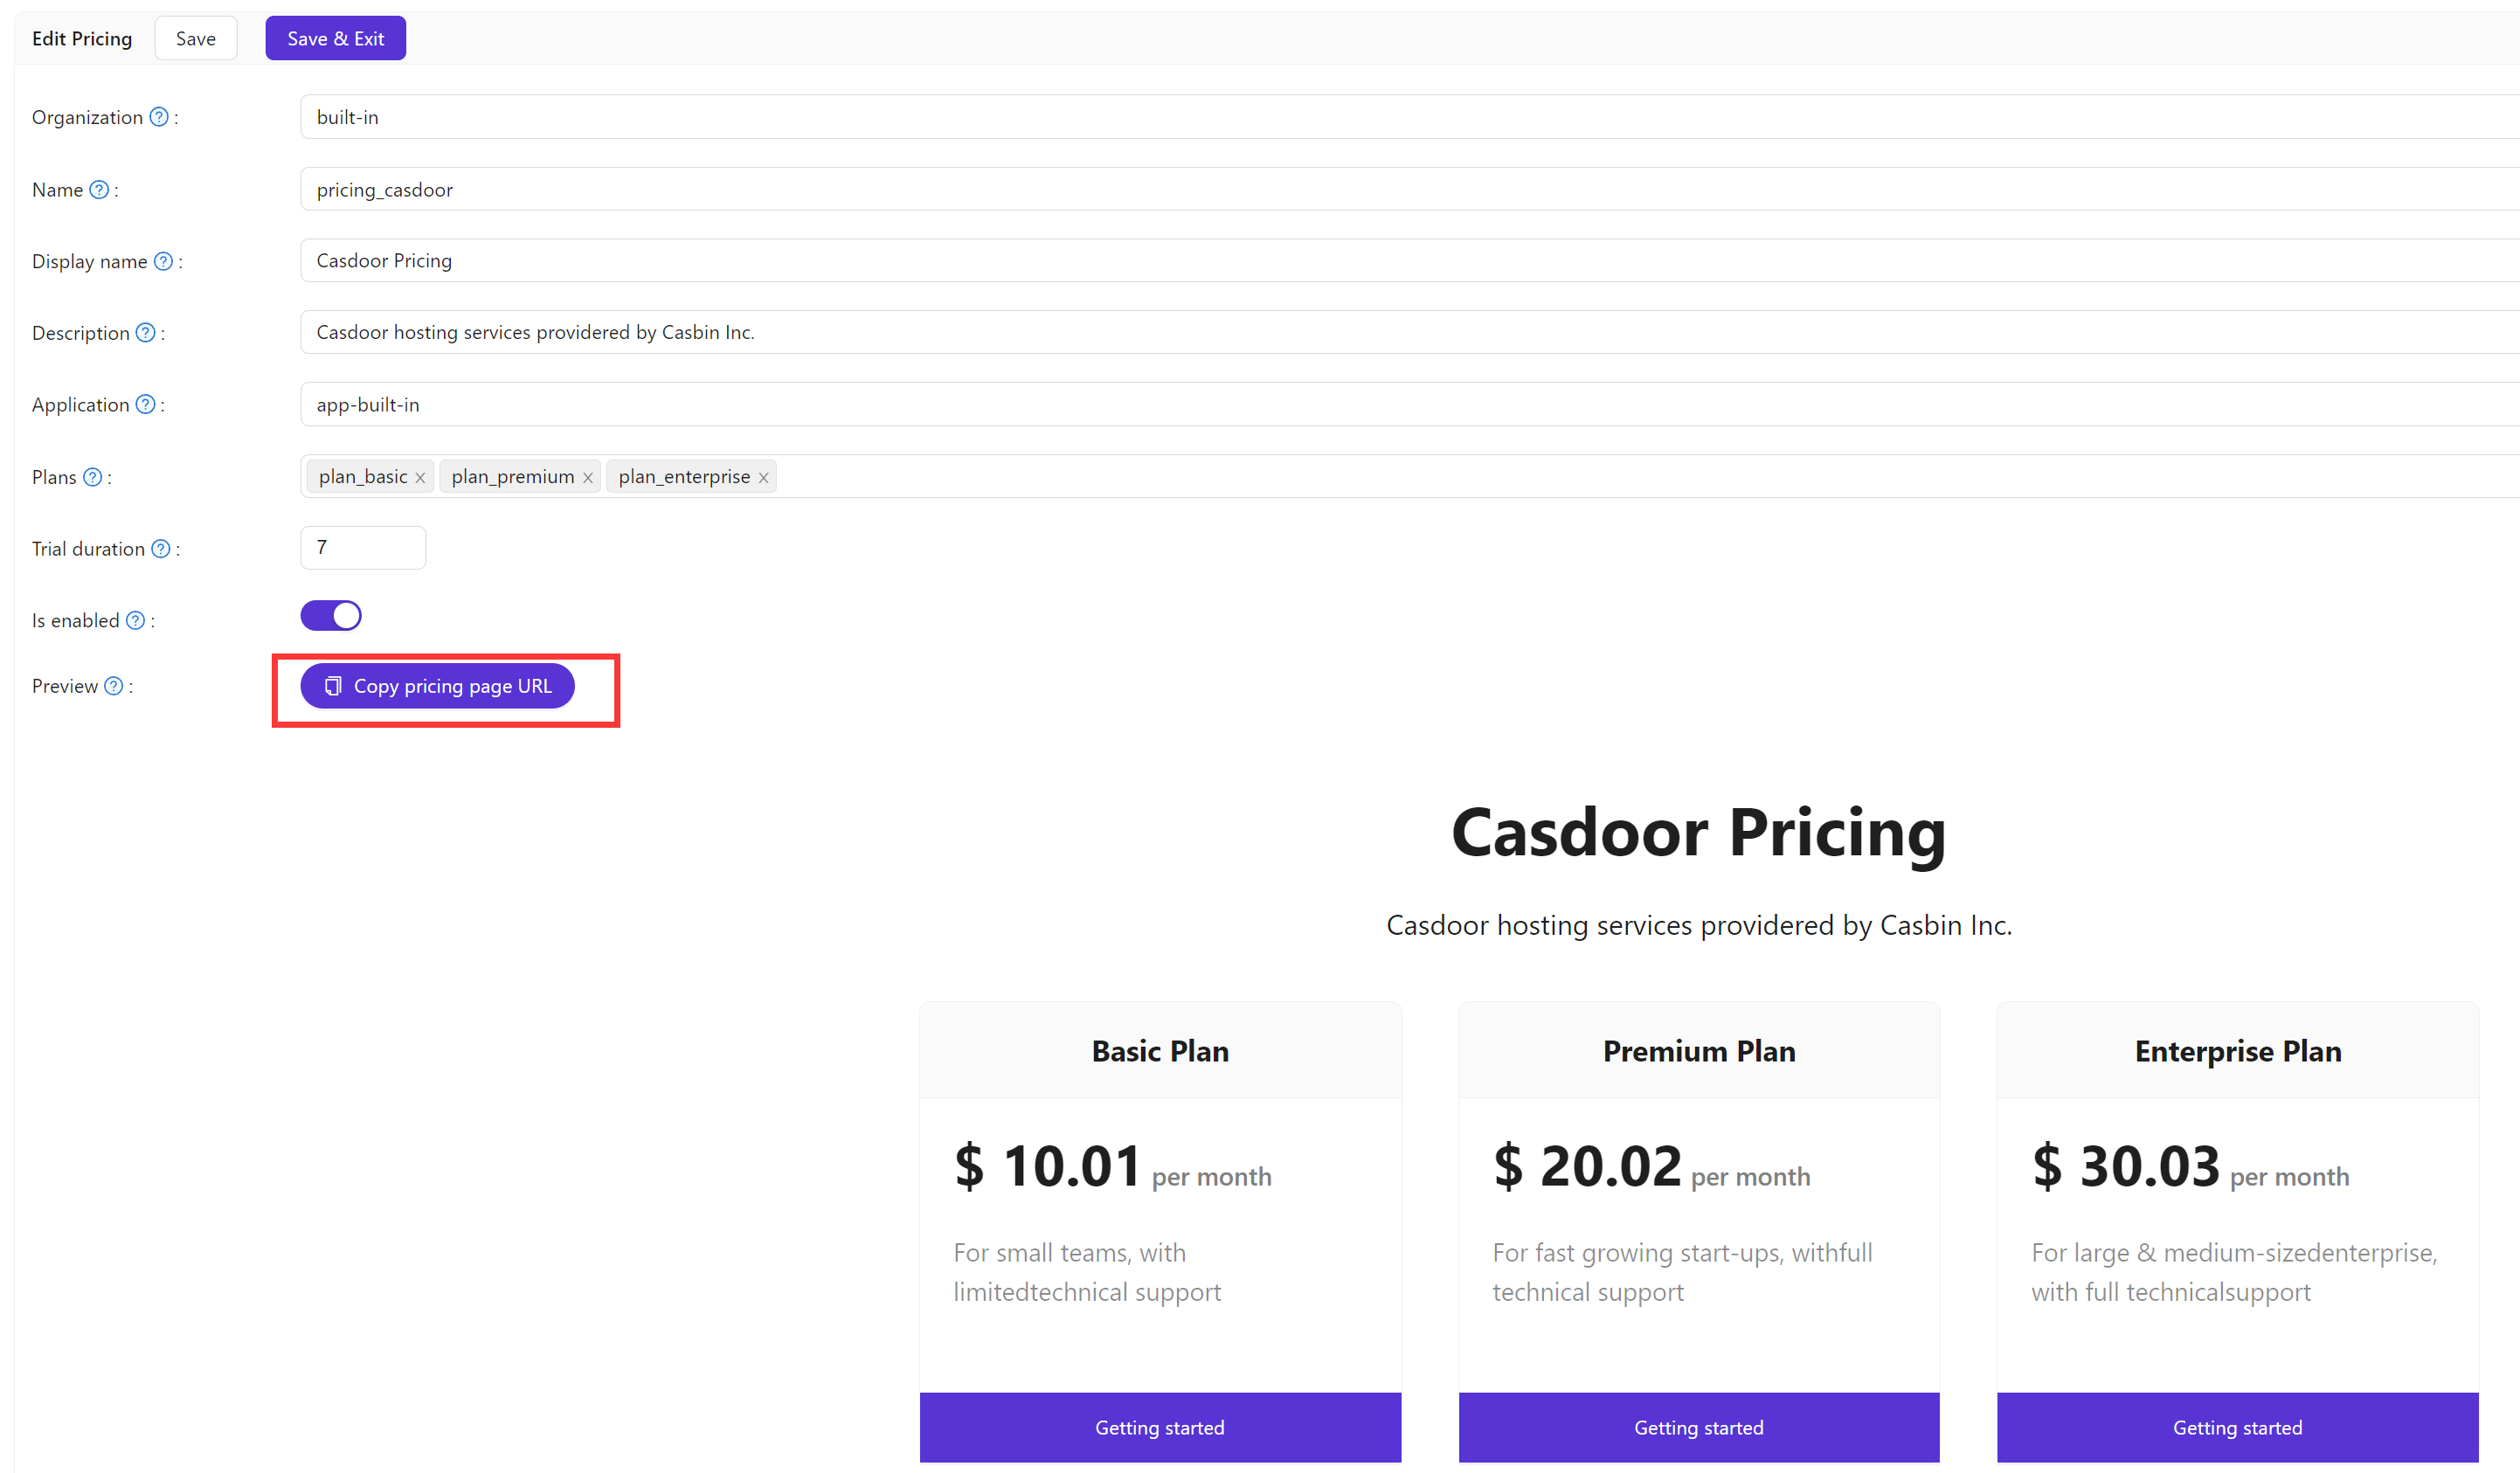 pricing page url